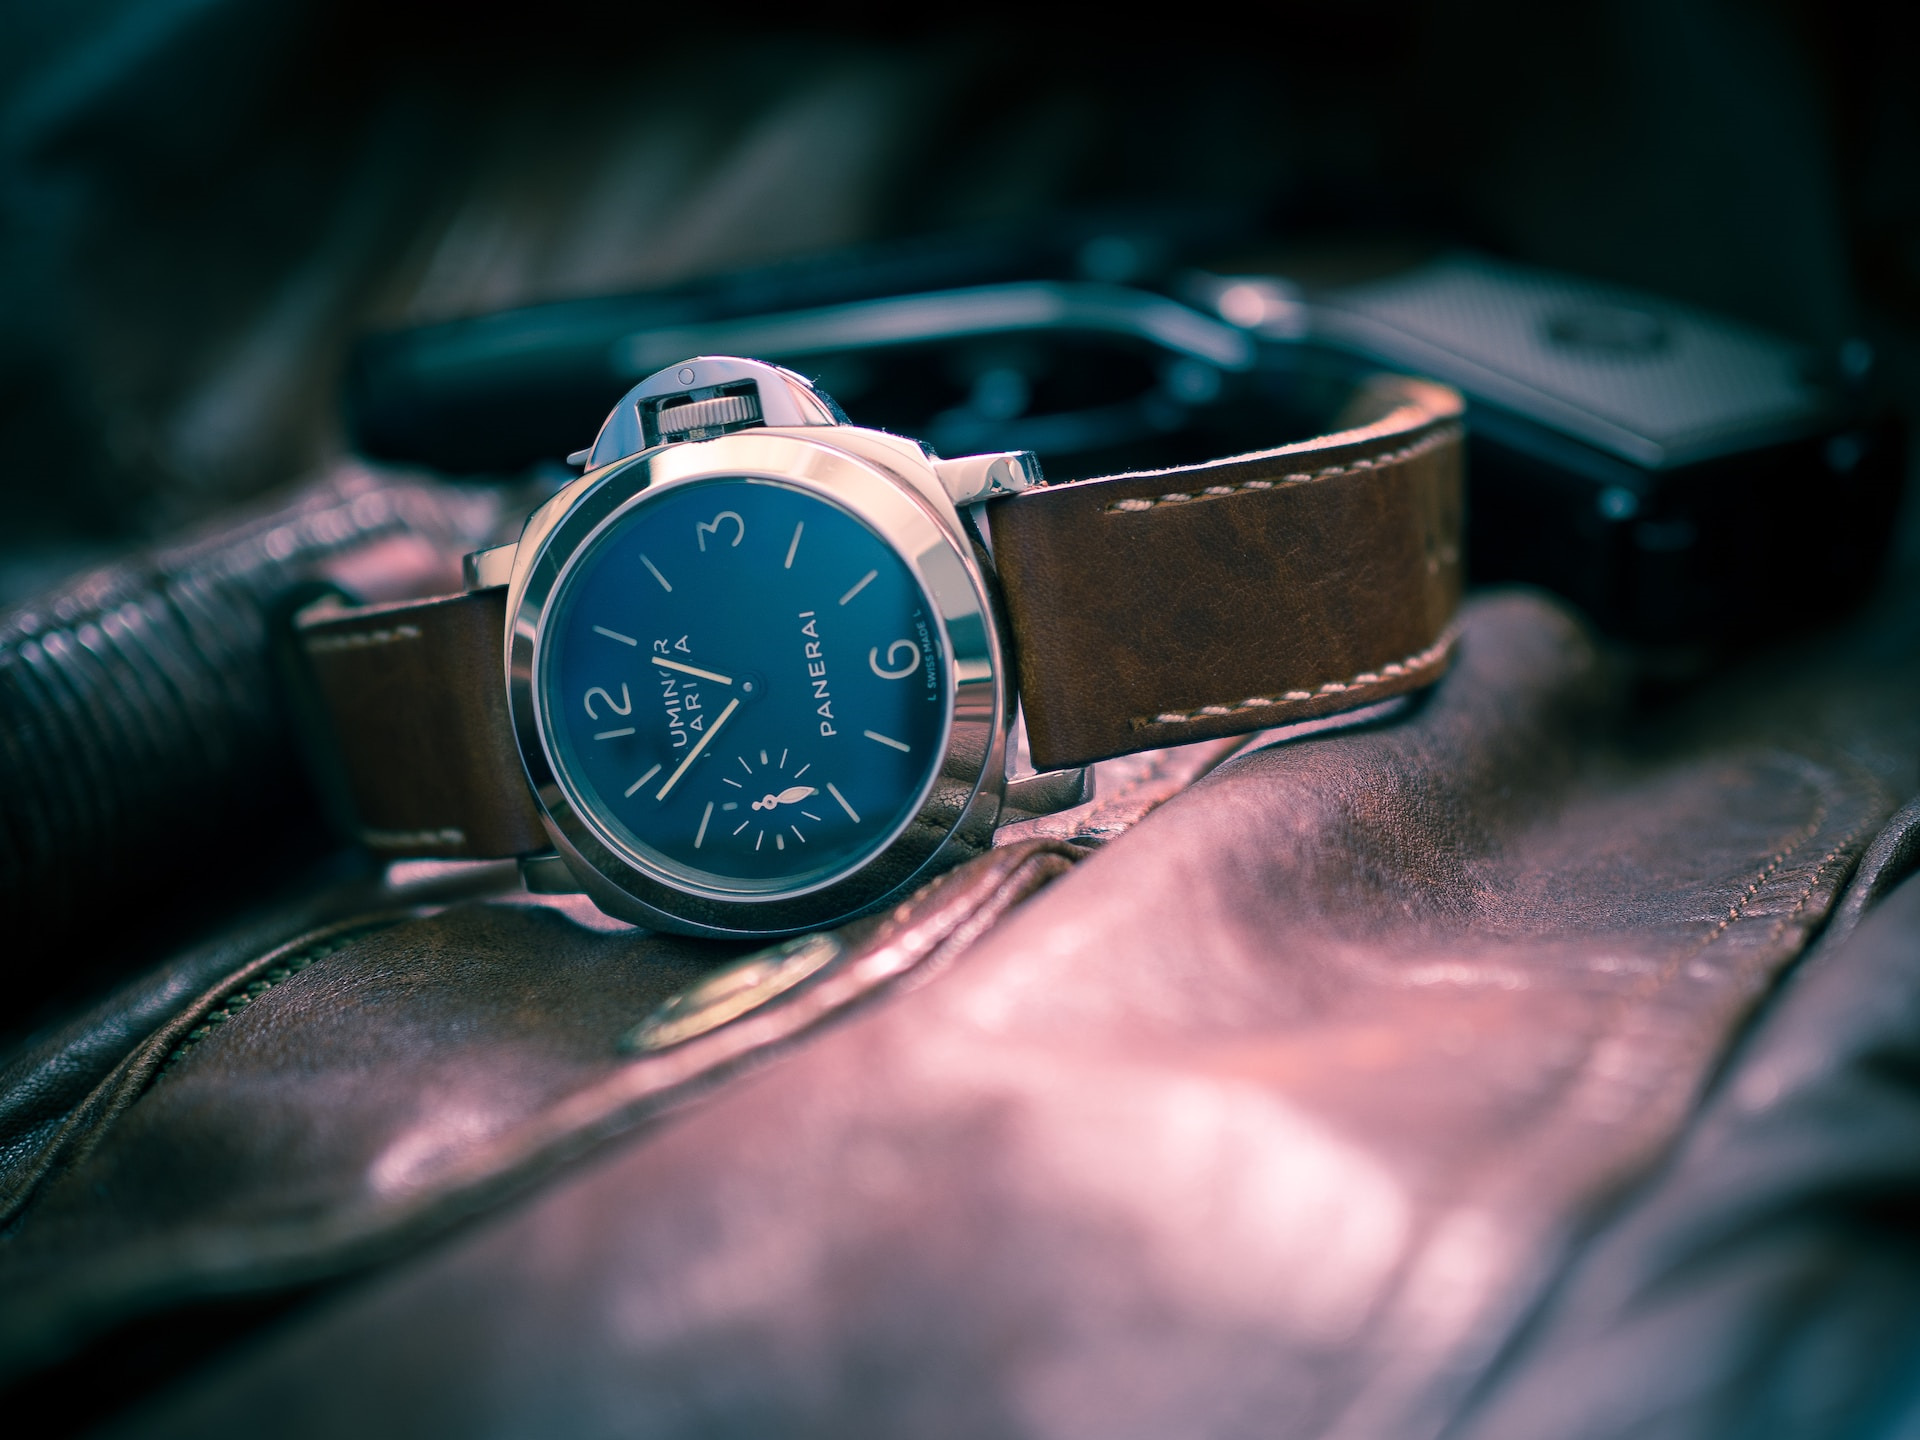 a Panerai watch resting on a leather surface